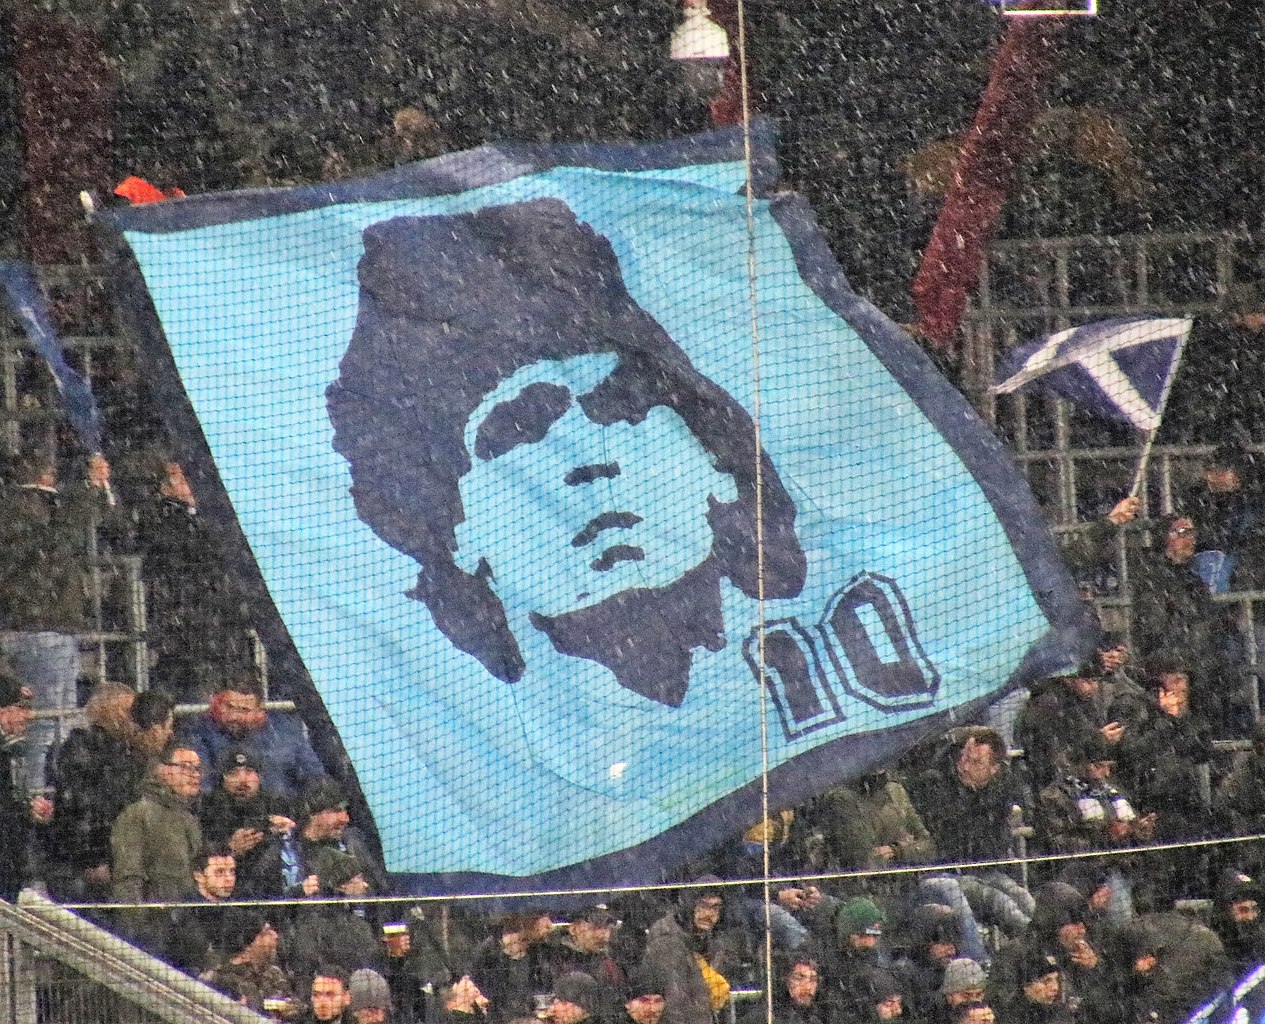 Napoli fans hoisting up a banner of Diego Maradona during a match